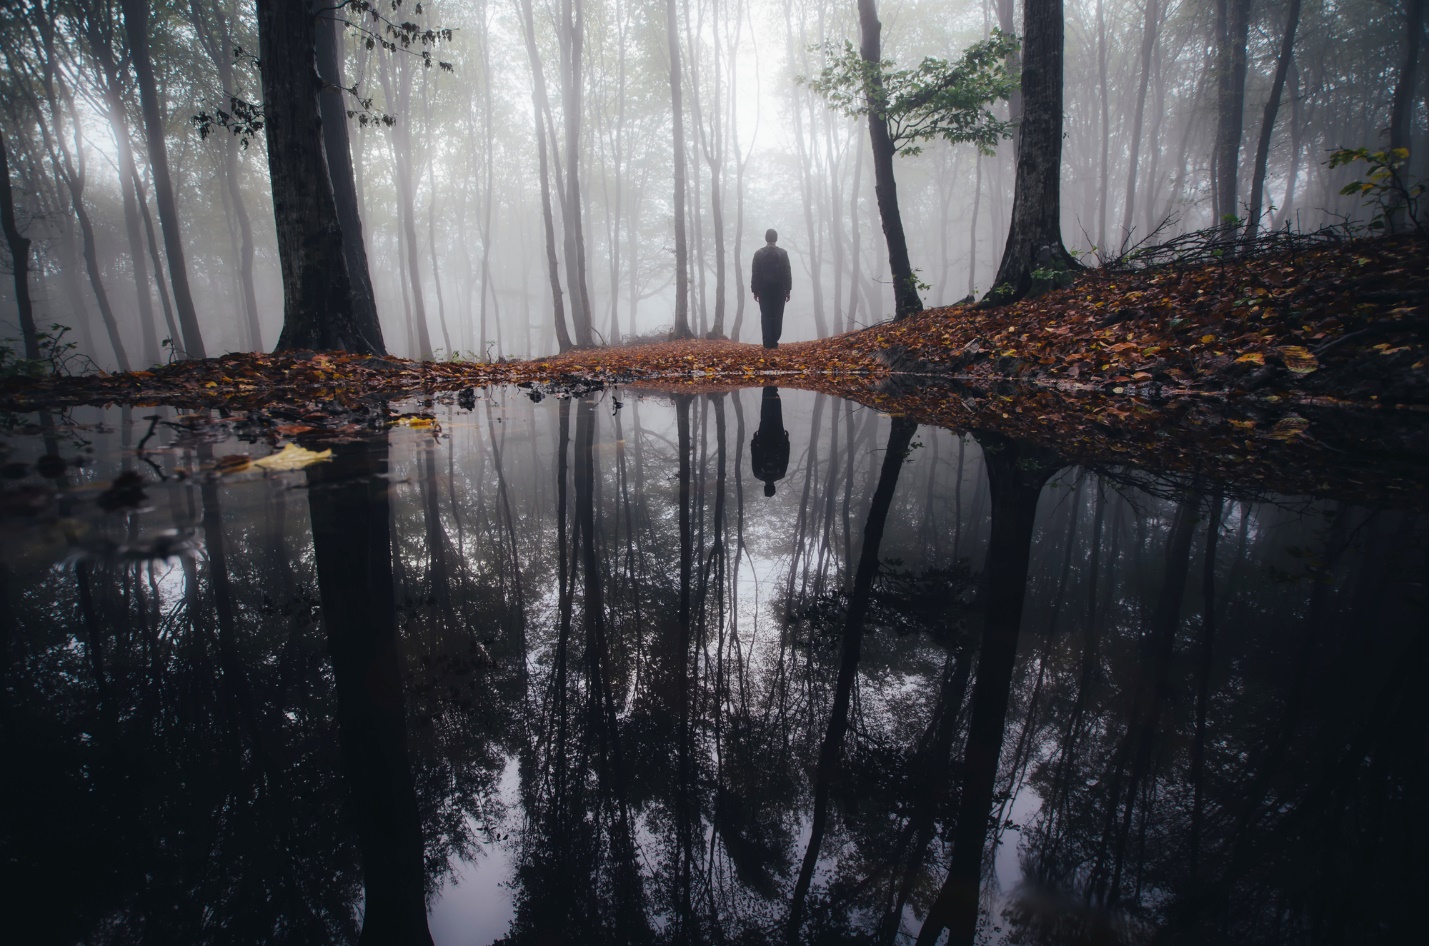 A person standing in a swamp

Description automatically generated with low confidence